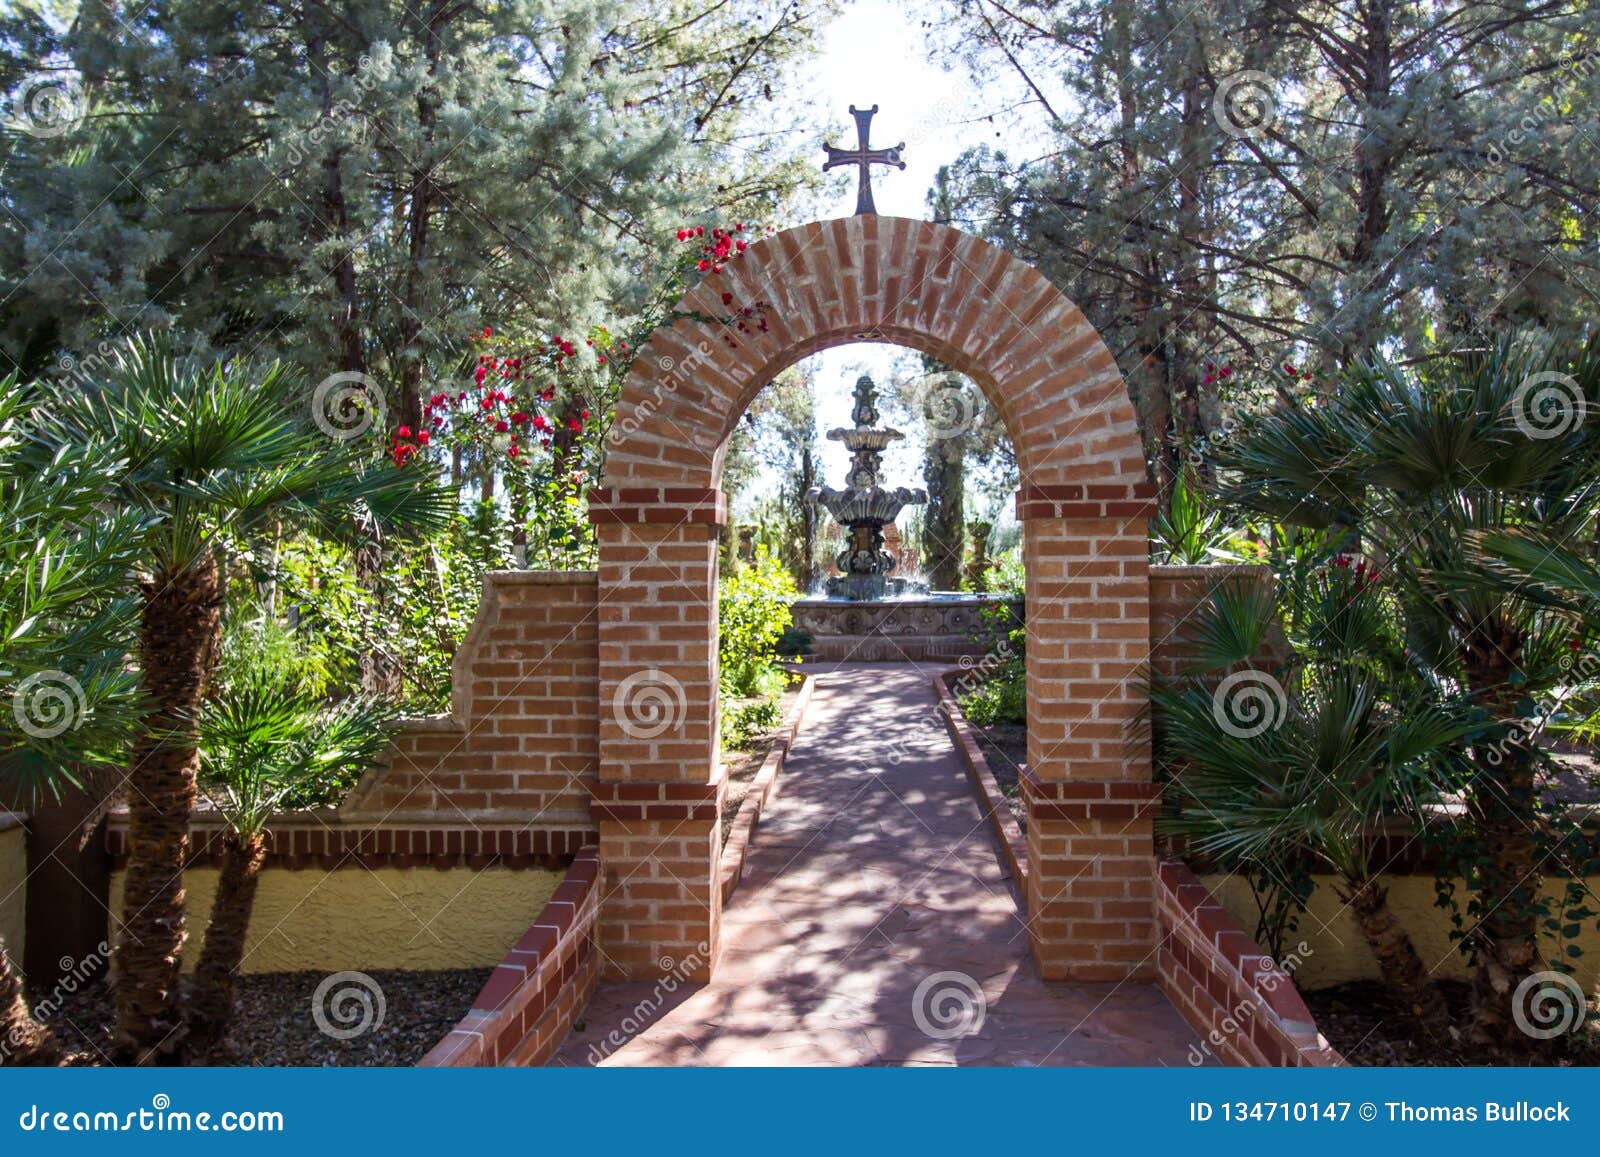 Arch with Cross Leading To Fountain in Monastery Garden Stock Image